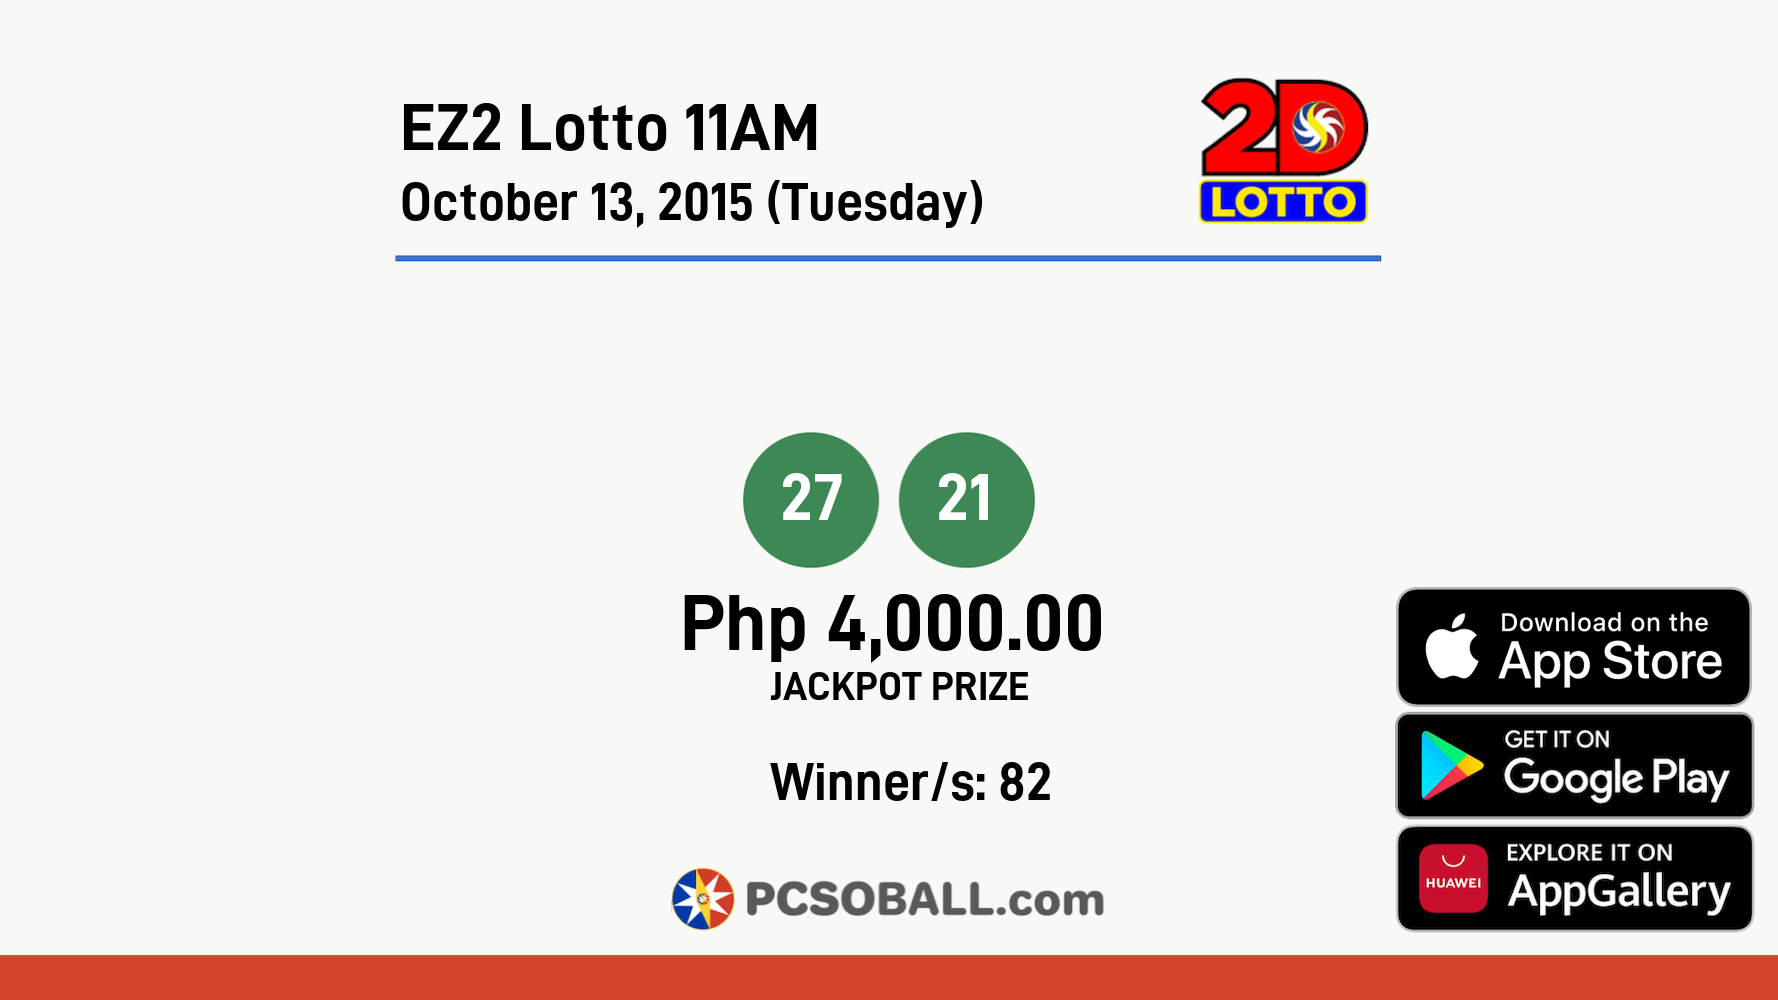 EZ2 Lotto 11AM October 13, 2015 (Tuesday) Result